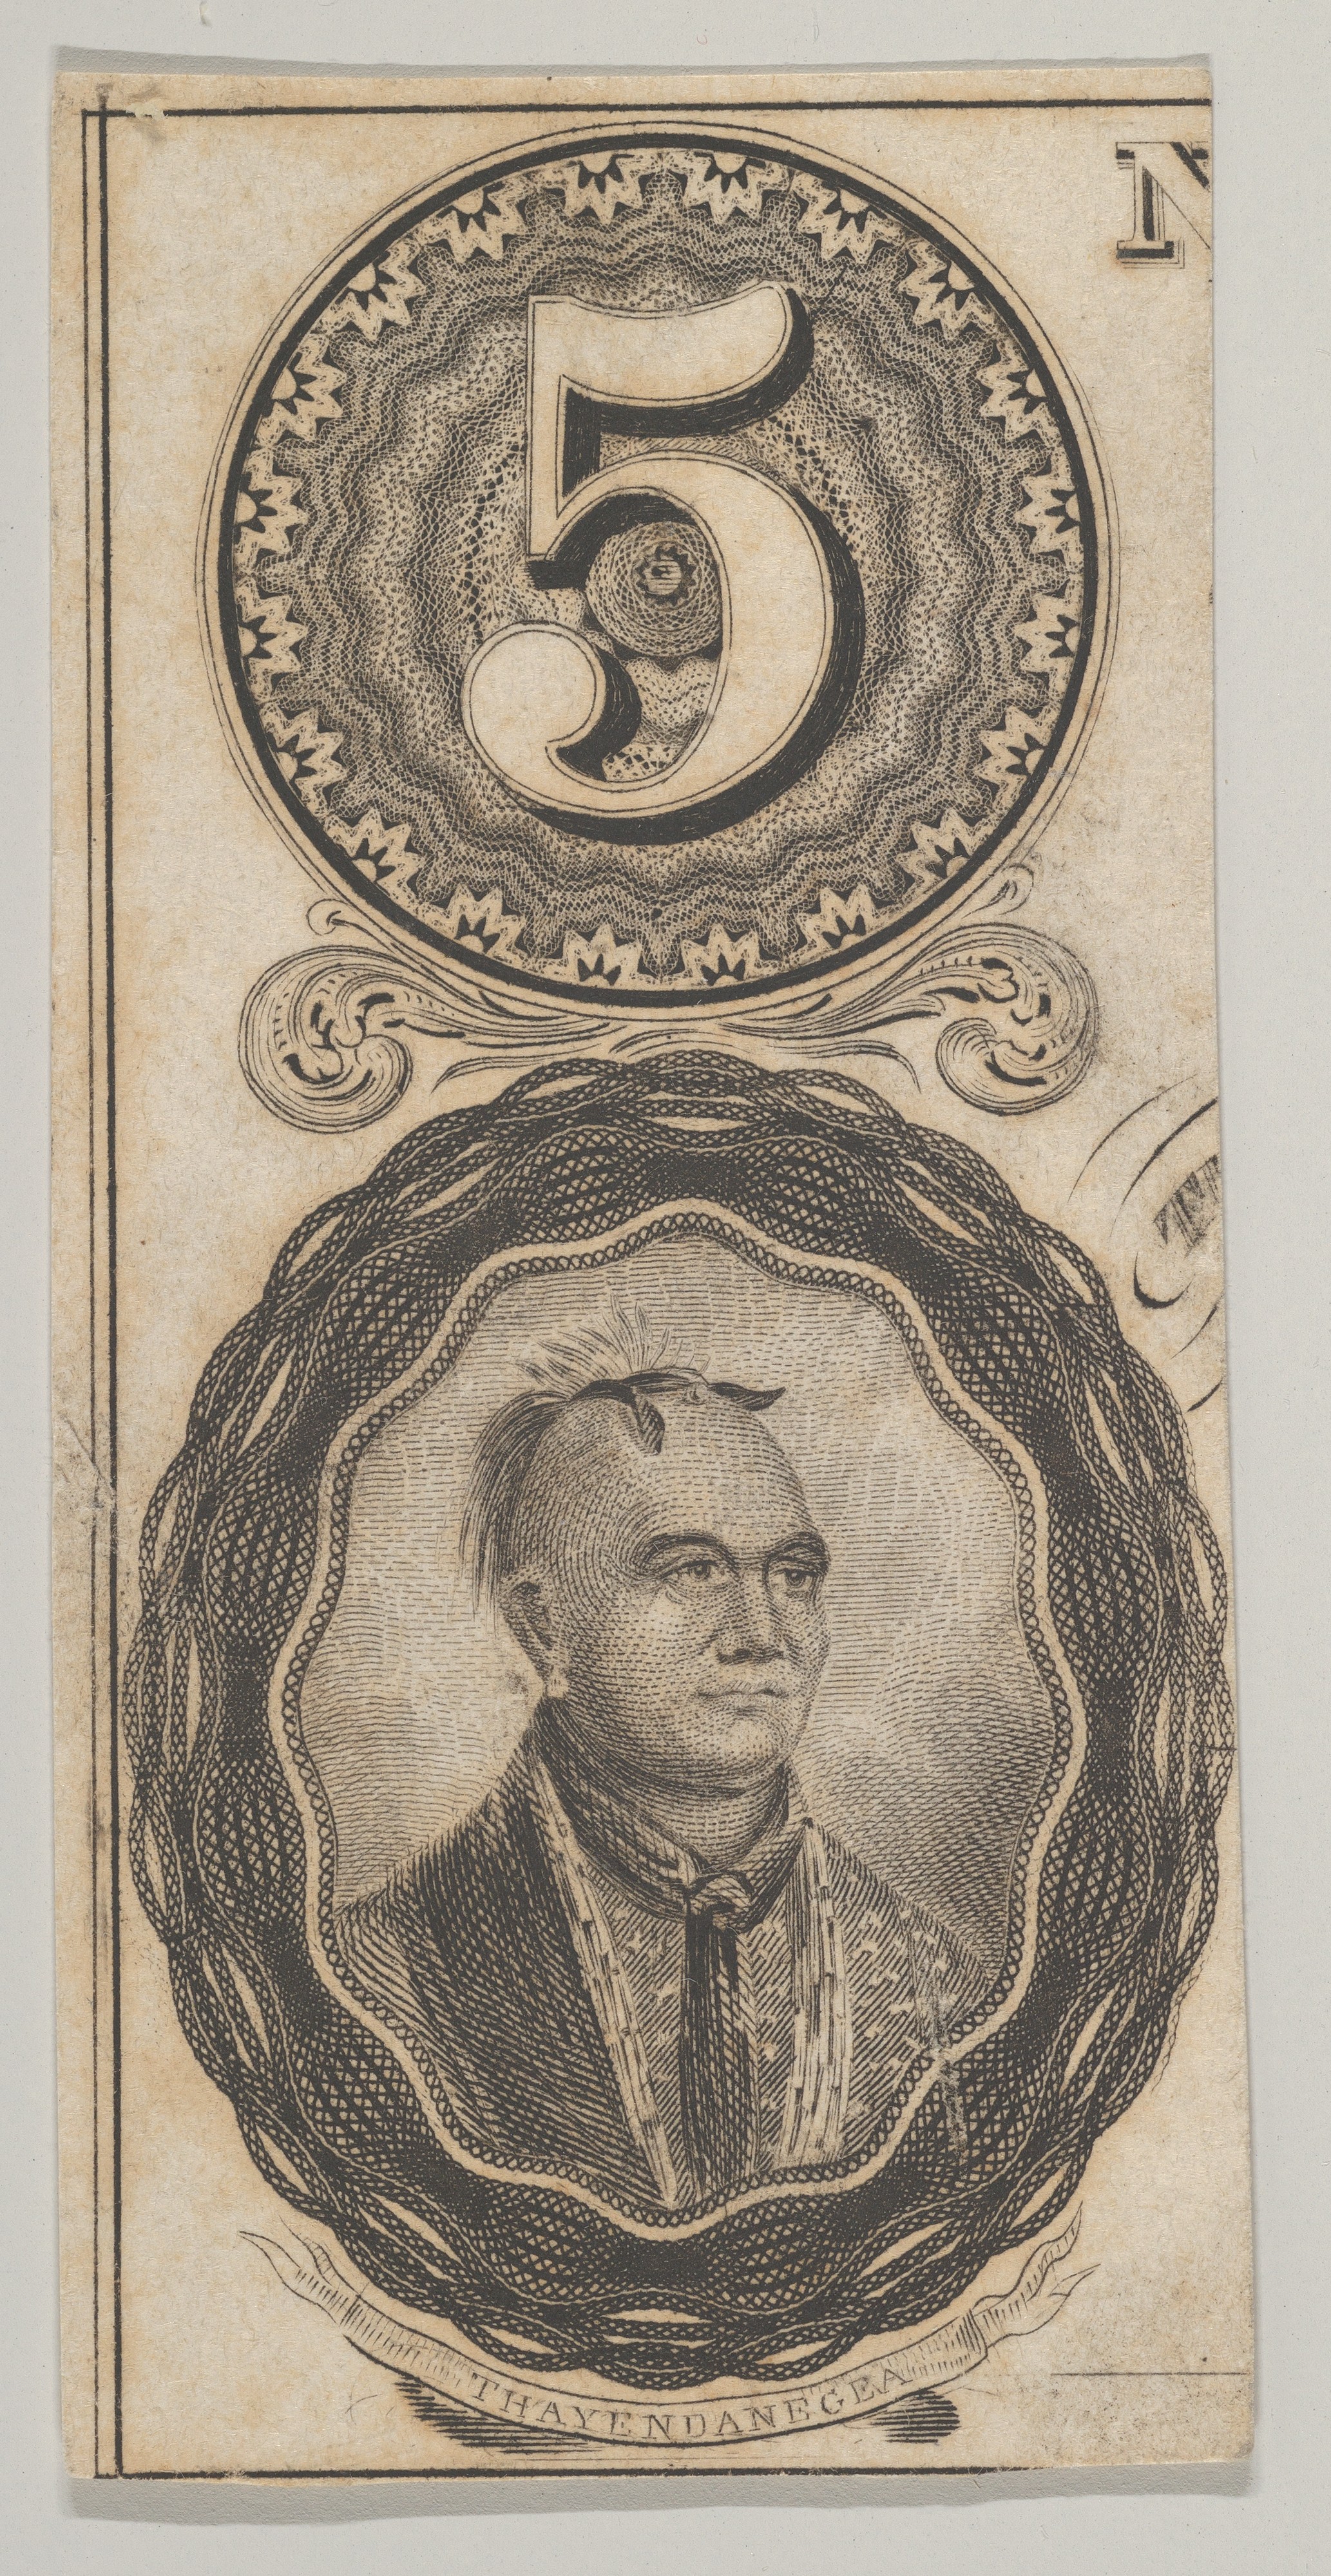 Bank Note featuring image of Joseph Brant, New Jersey,  ca. 1824–37